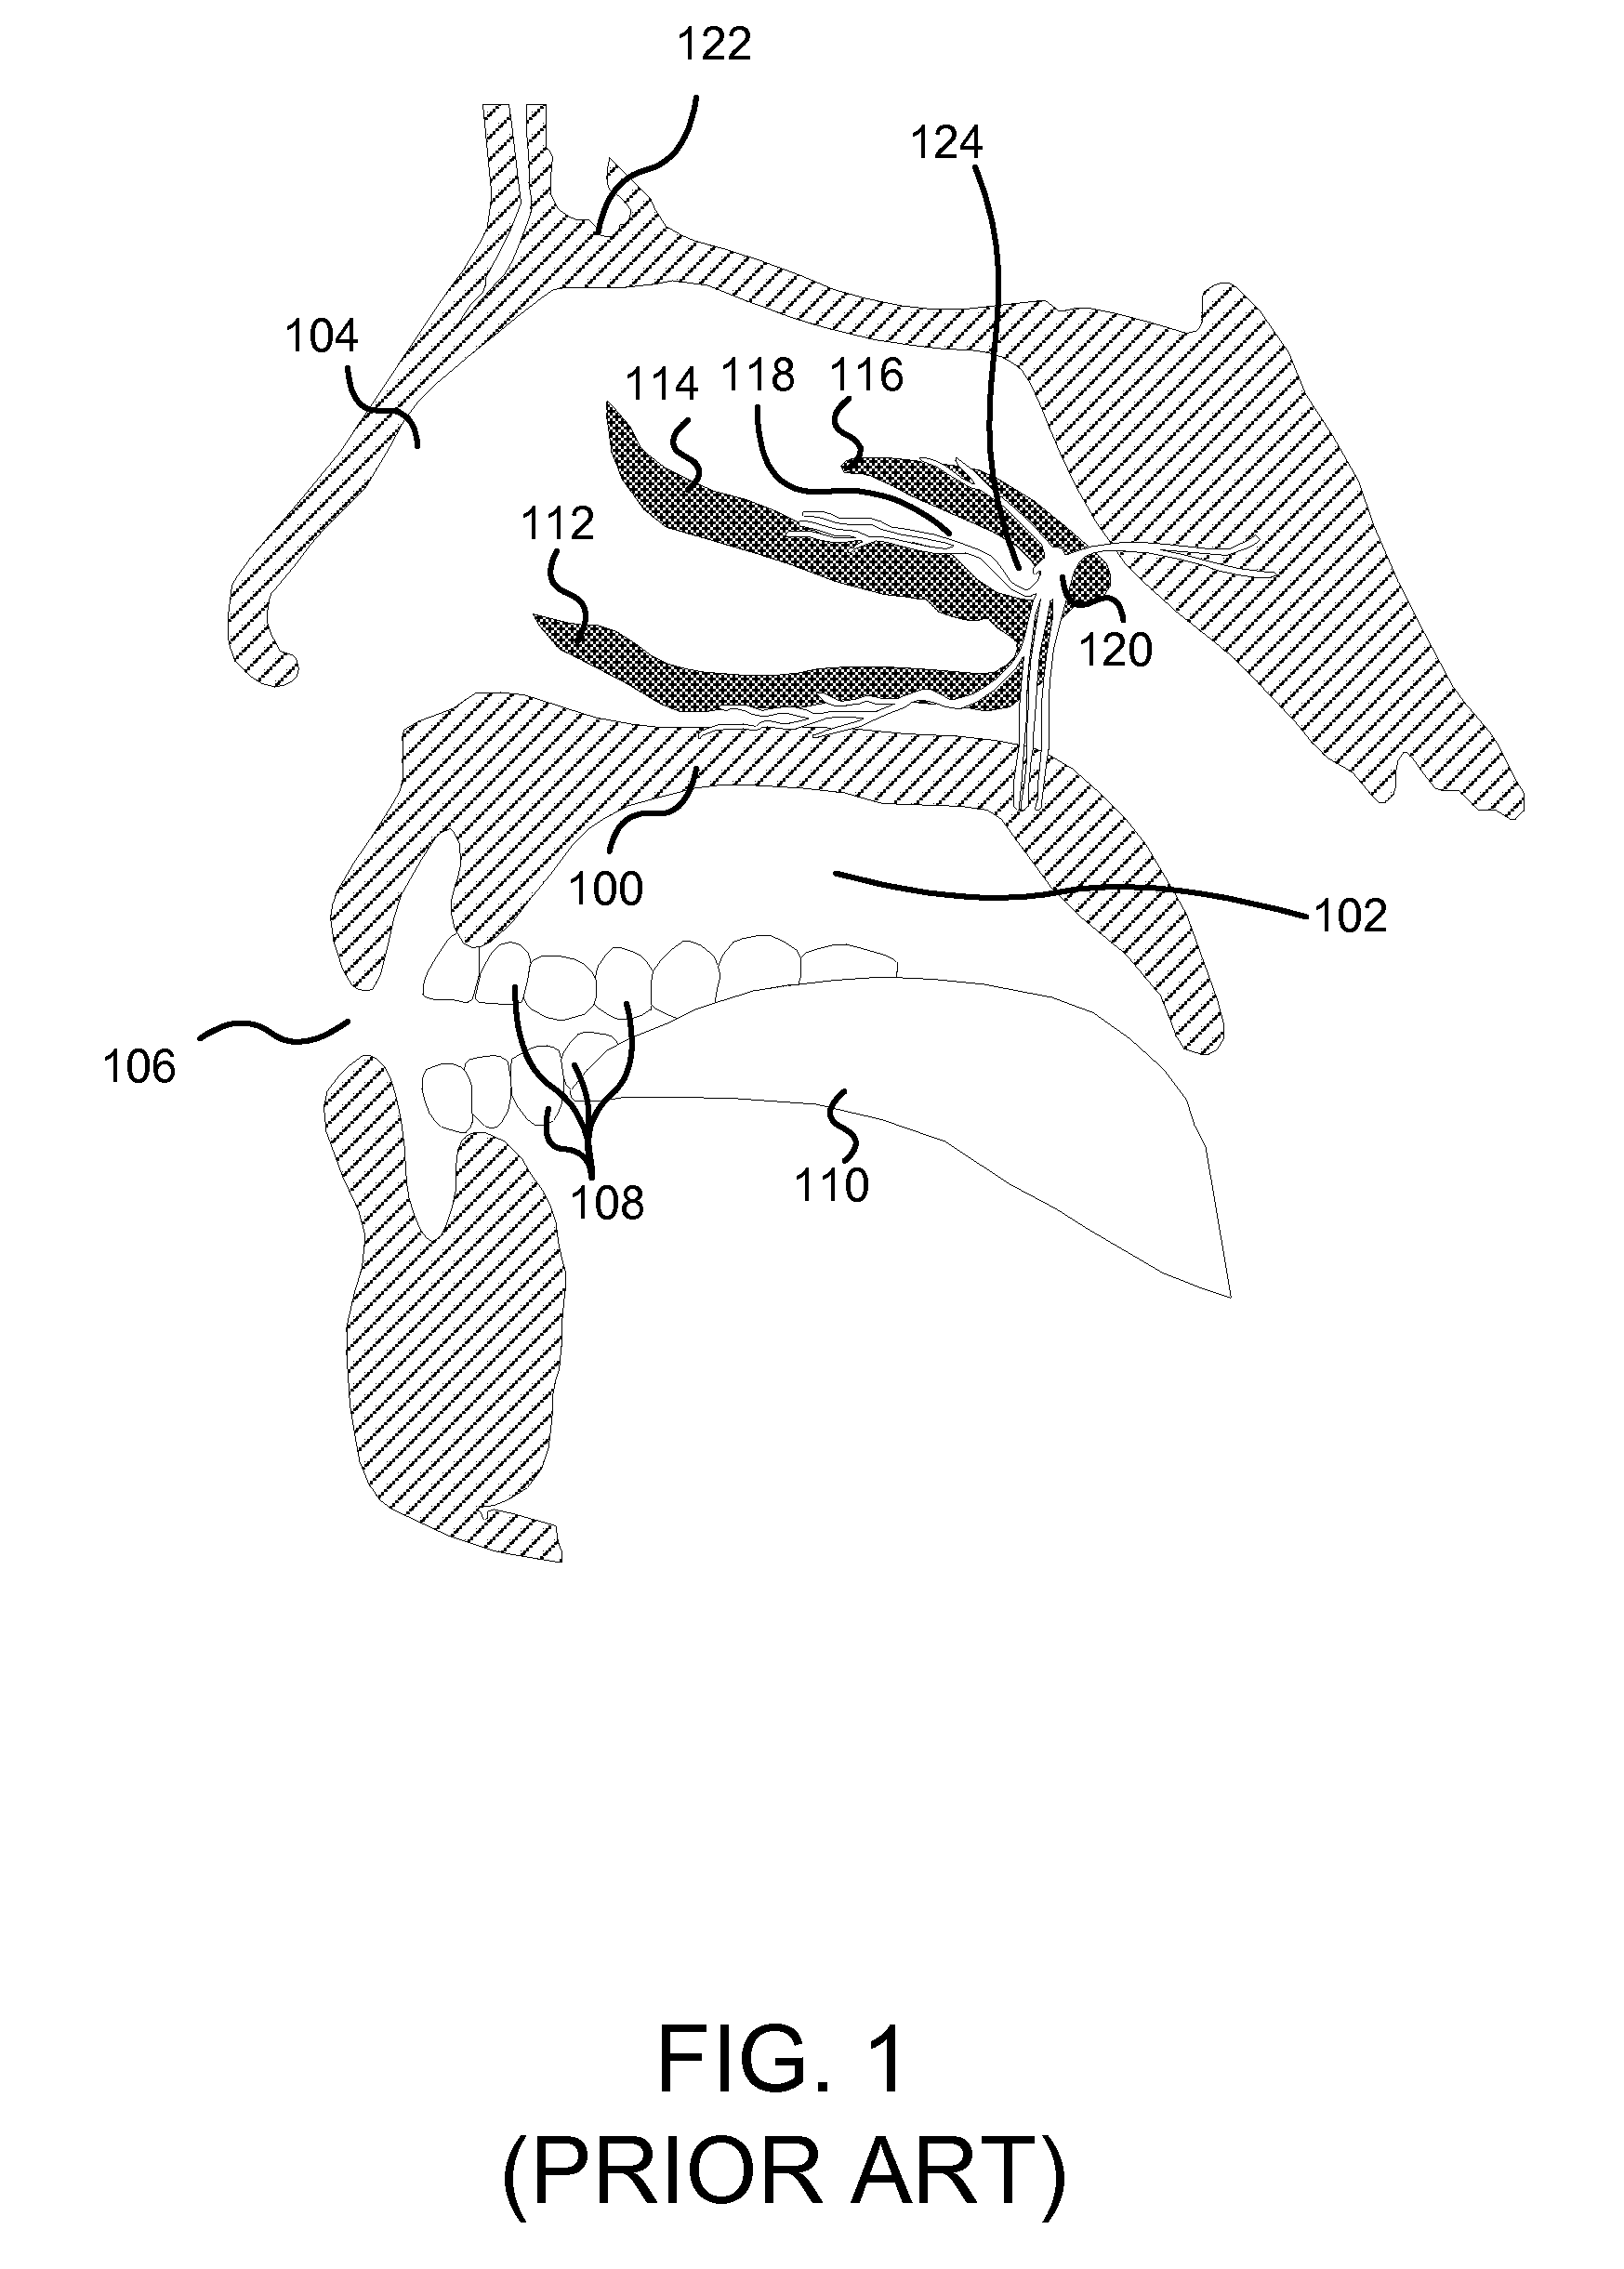 Apparatus, System, and Method for Treating Atypical Headaches